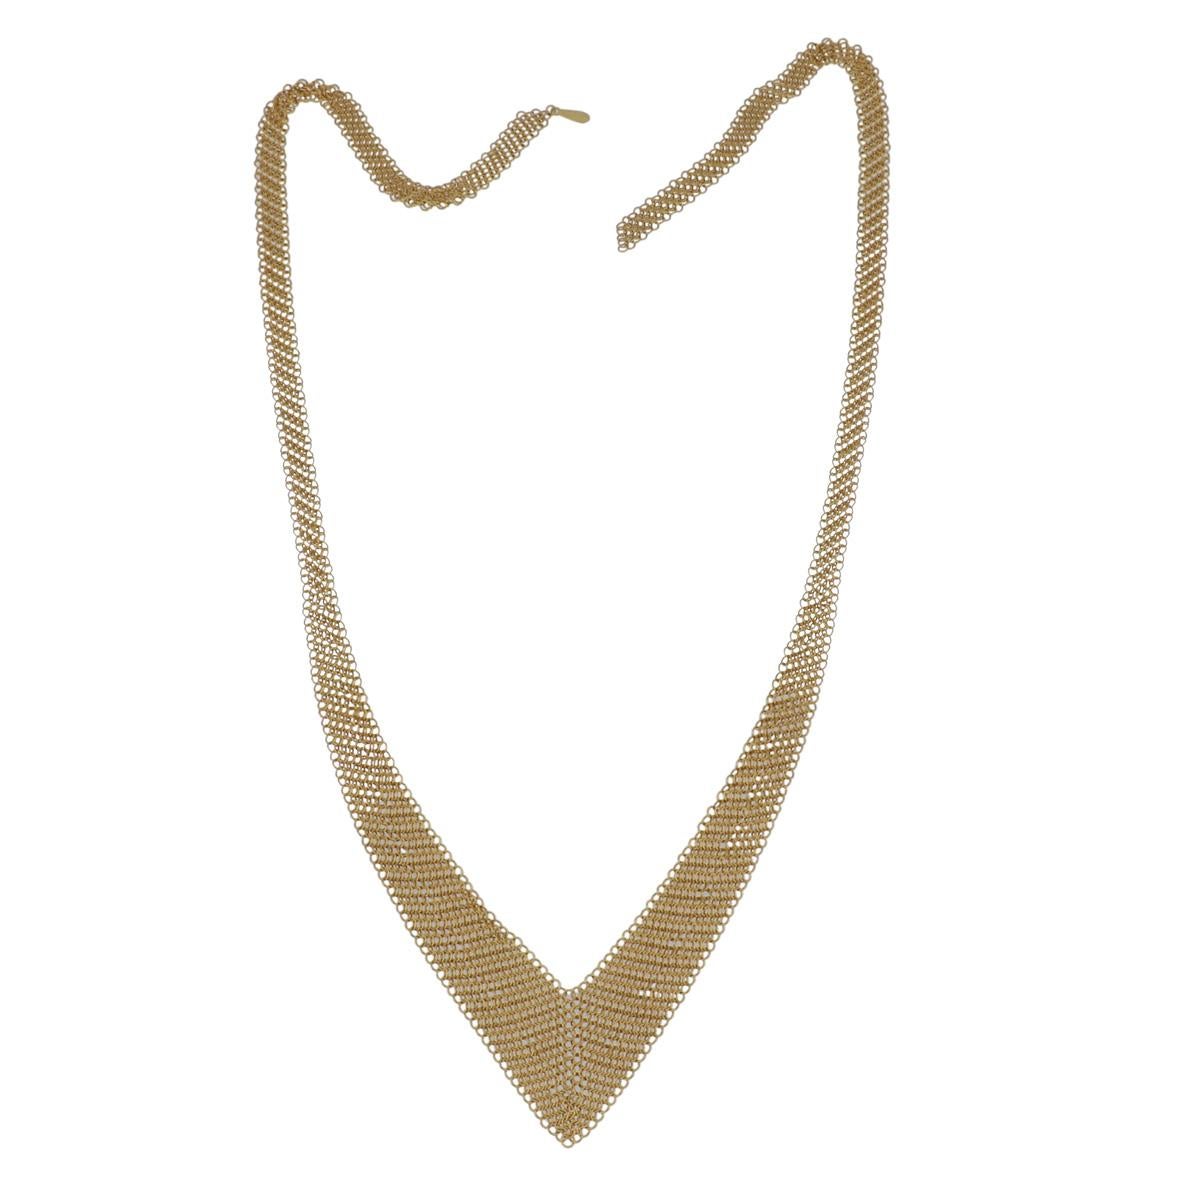 Elsa Peretti mesh necklace in 18K yellow gold marked 